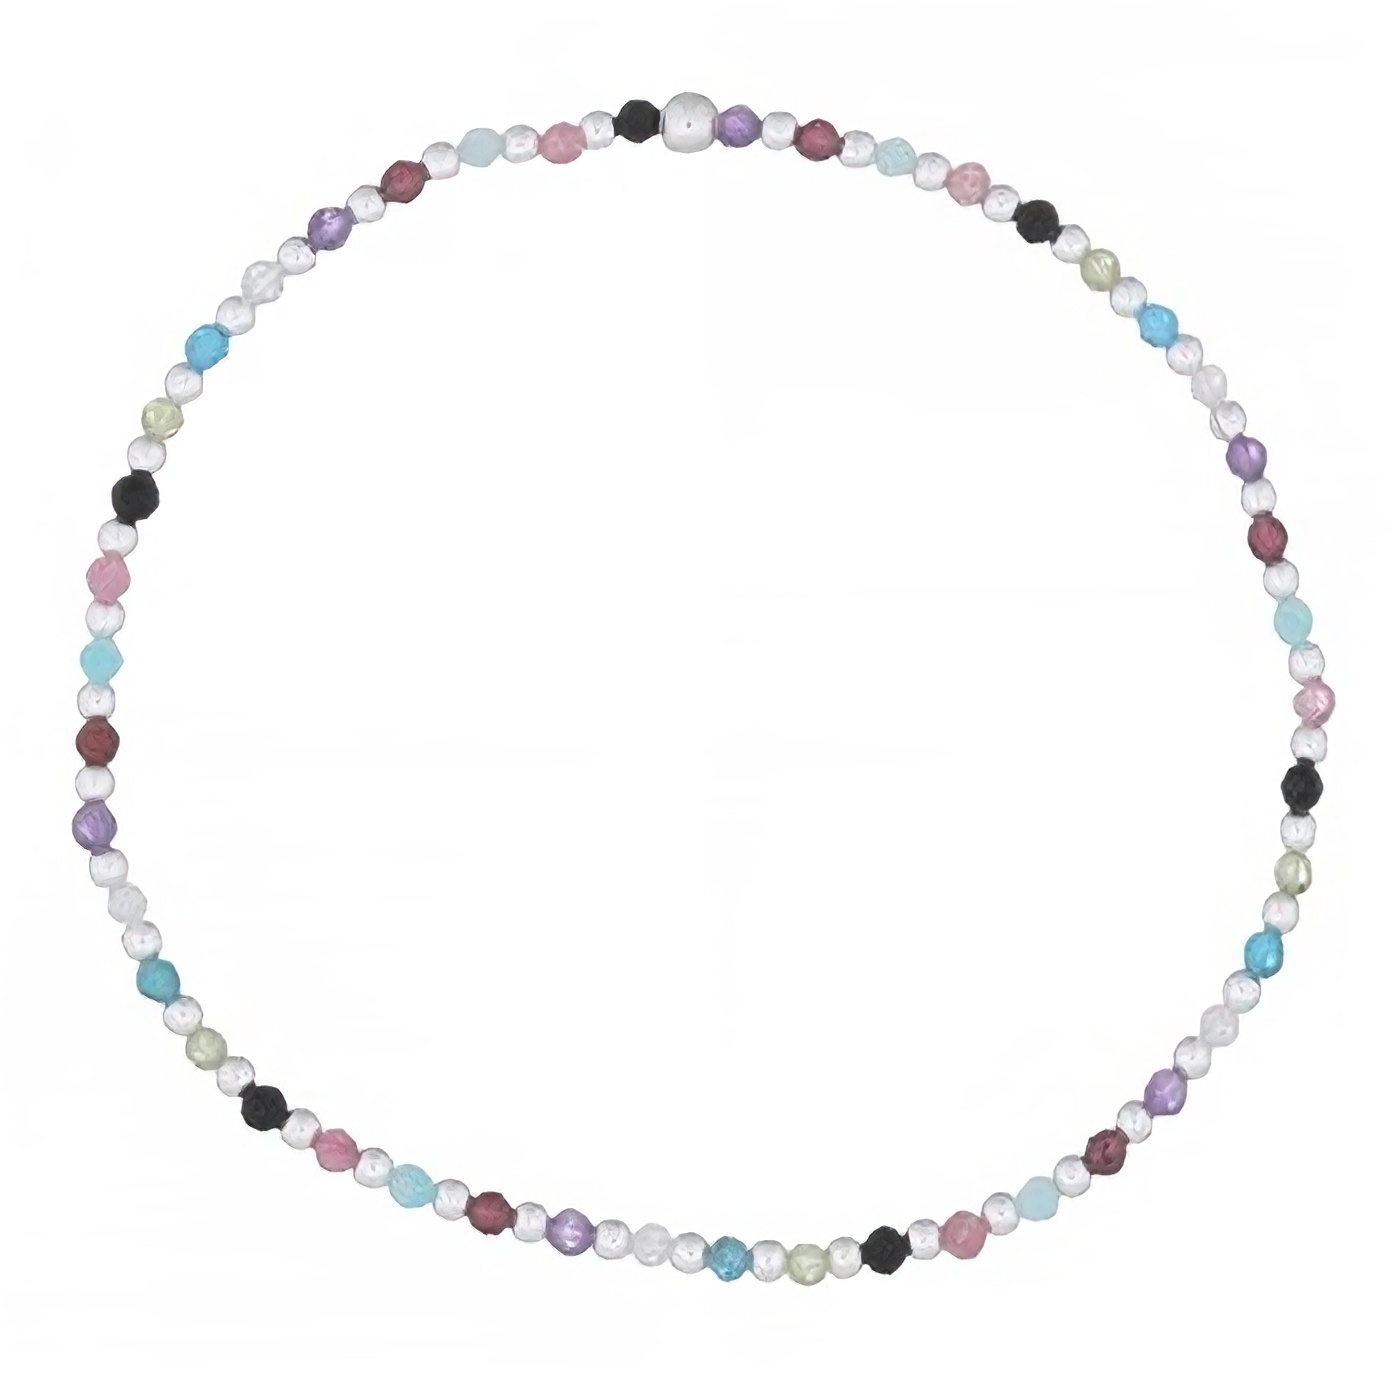 Stretchable Mix Stones With 925 Silver Round Beads Bracelet by BeYindi 